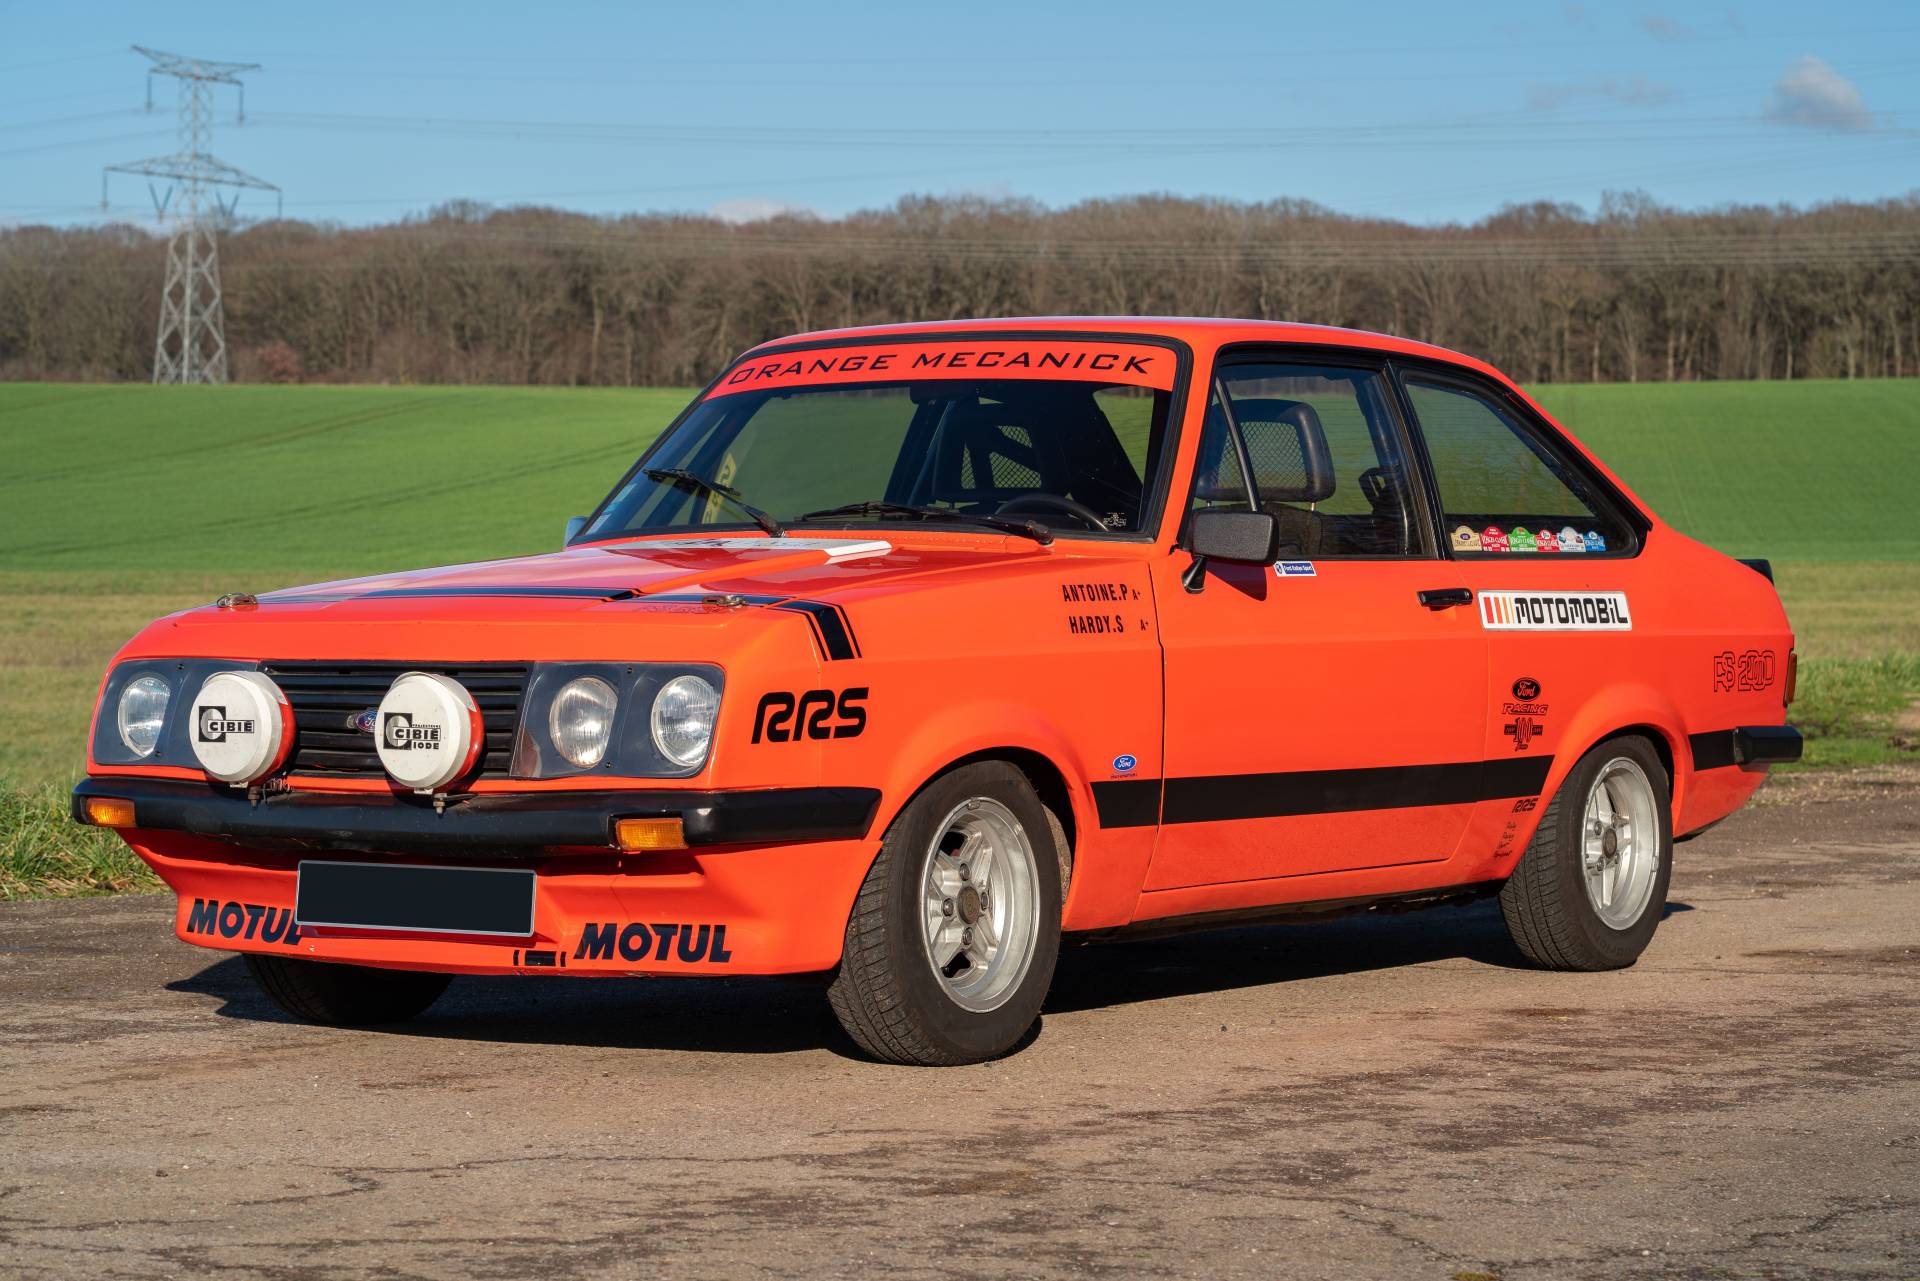 For Sale Ford Escort RS 2000 1979 offered for AUD 42 648